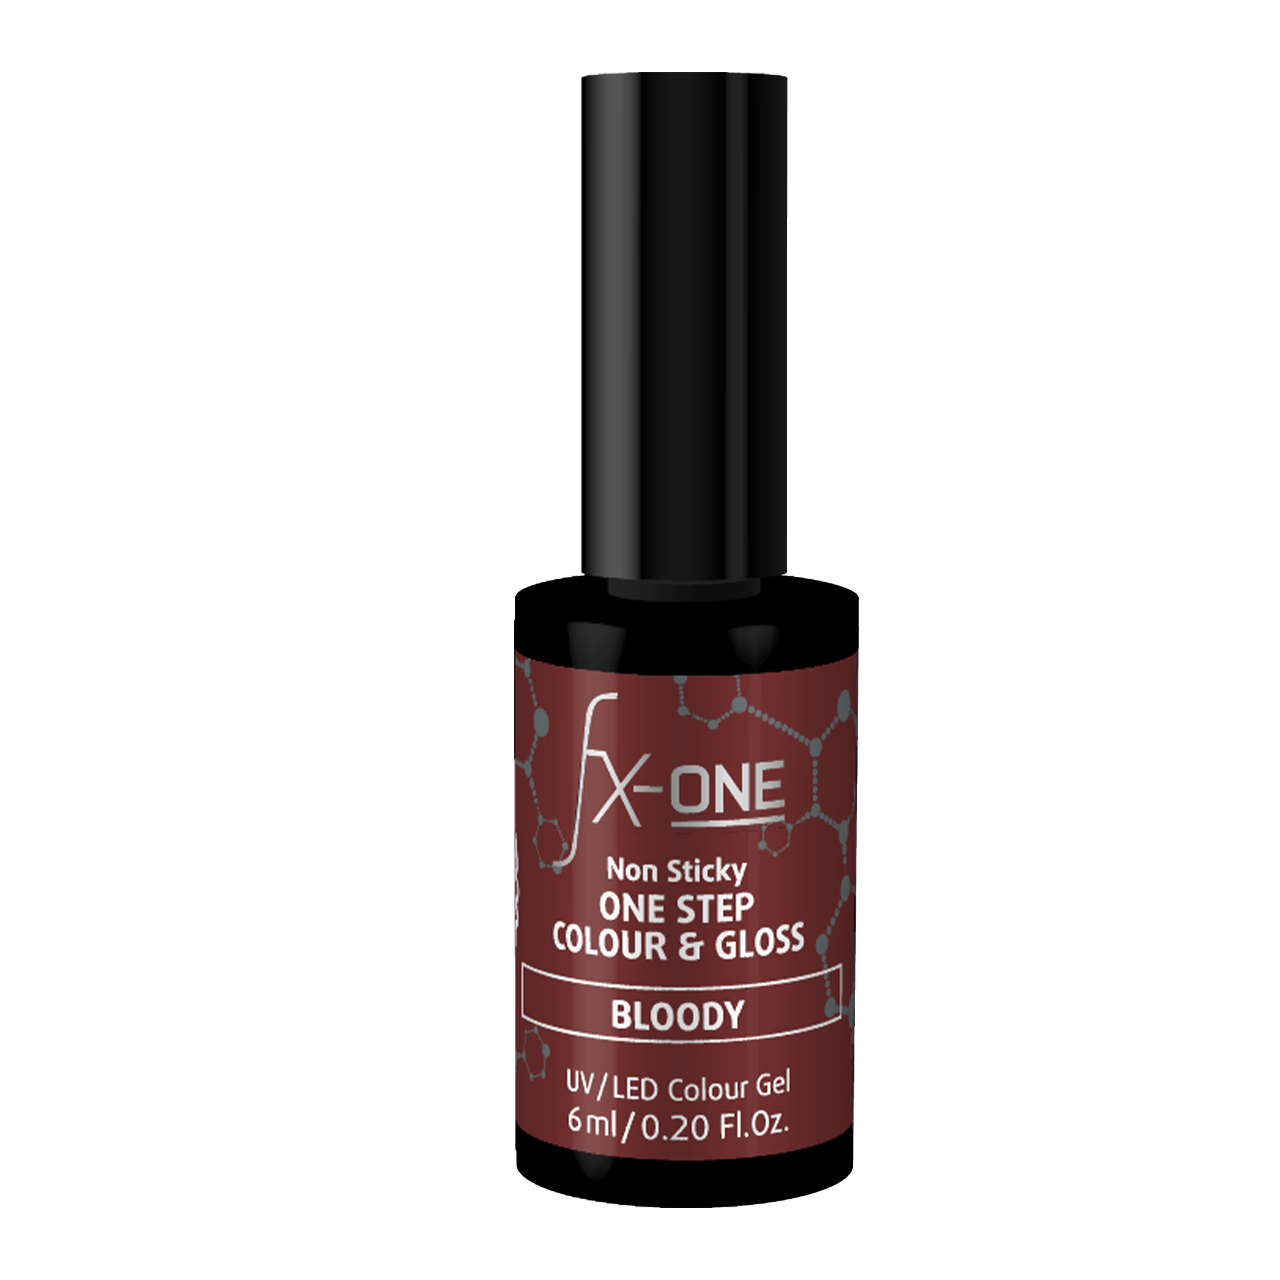 FX-One Colour & Gloss Bloody 6ml